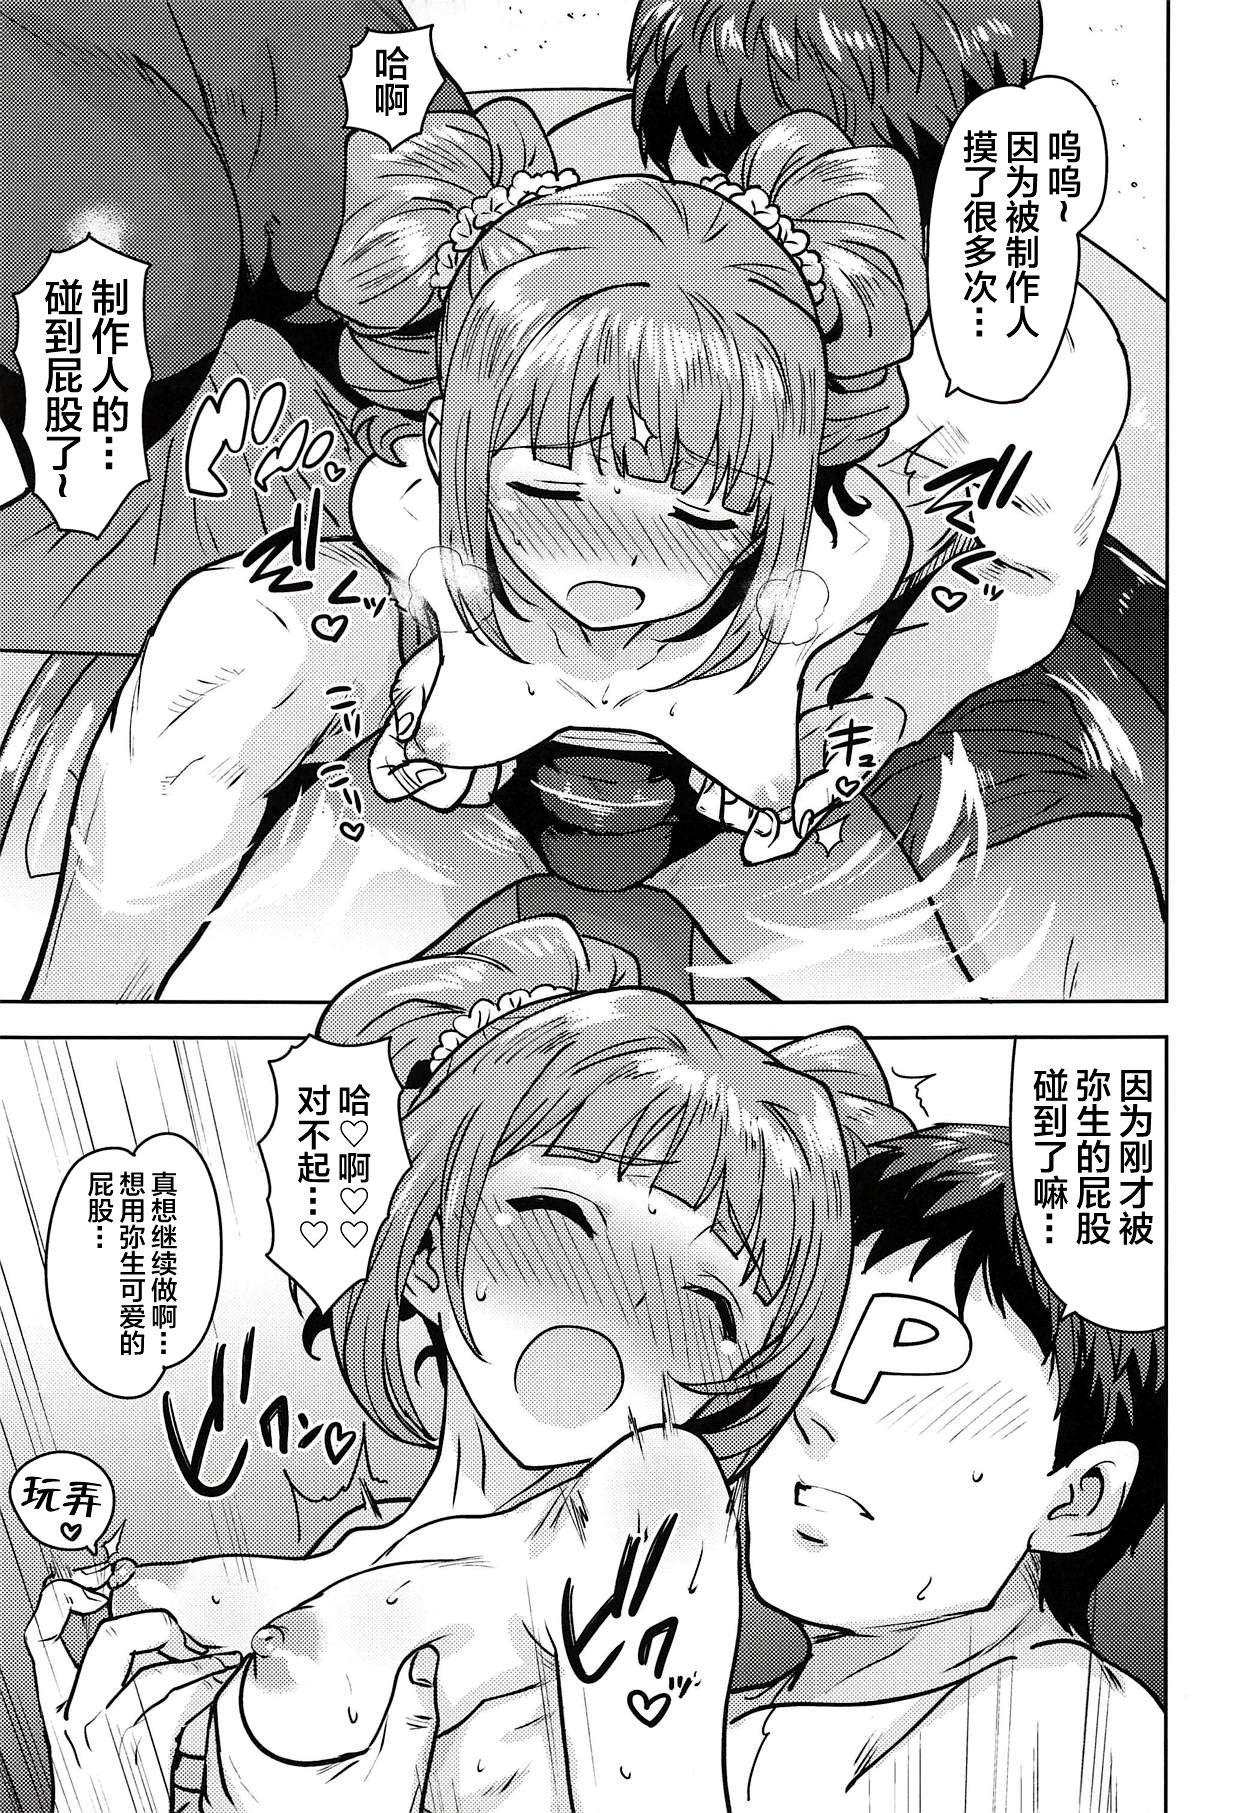 Plumper Yayoi to Issho 4 - The idolmaster Cfnm - Page 8